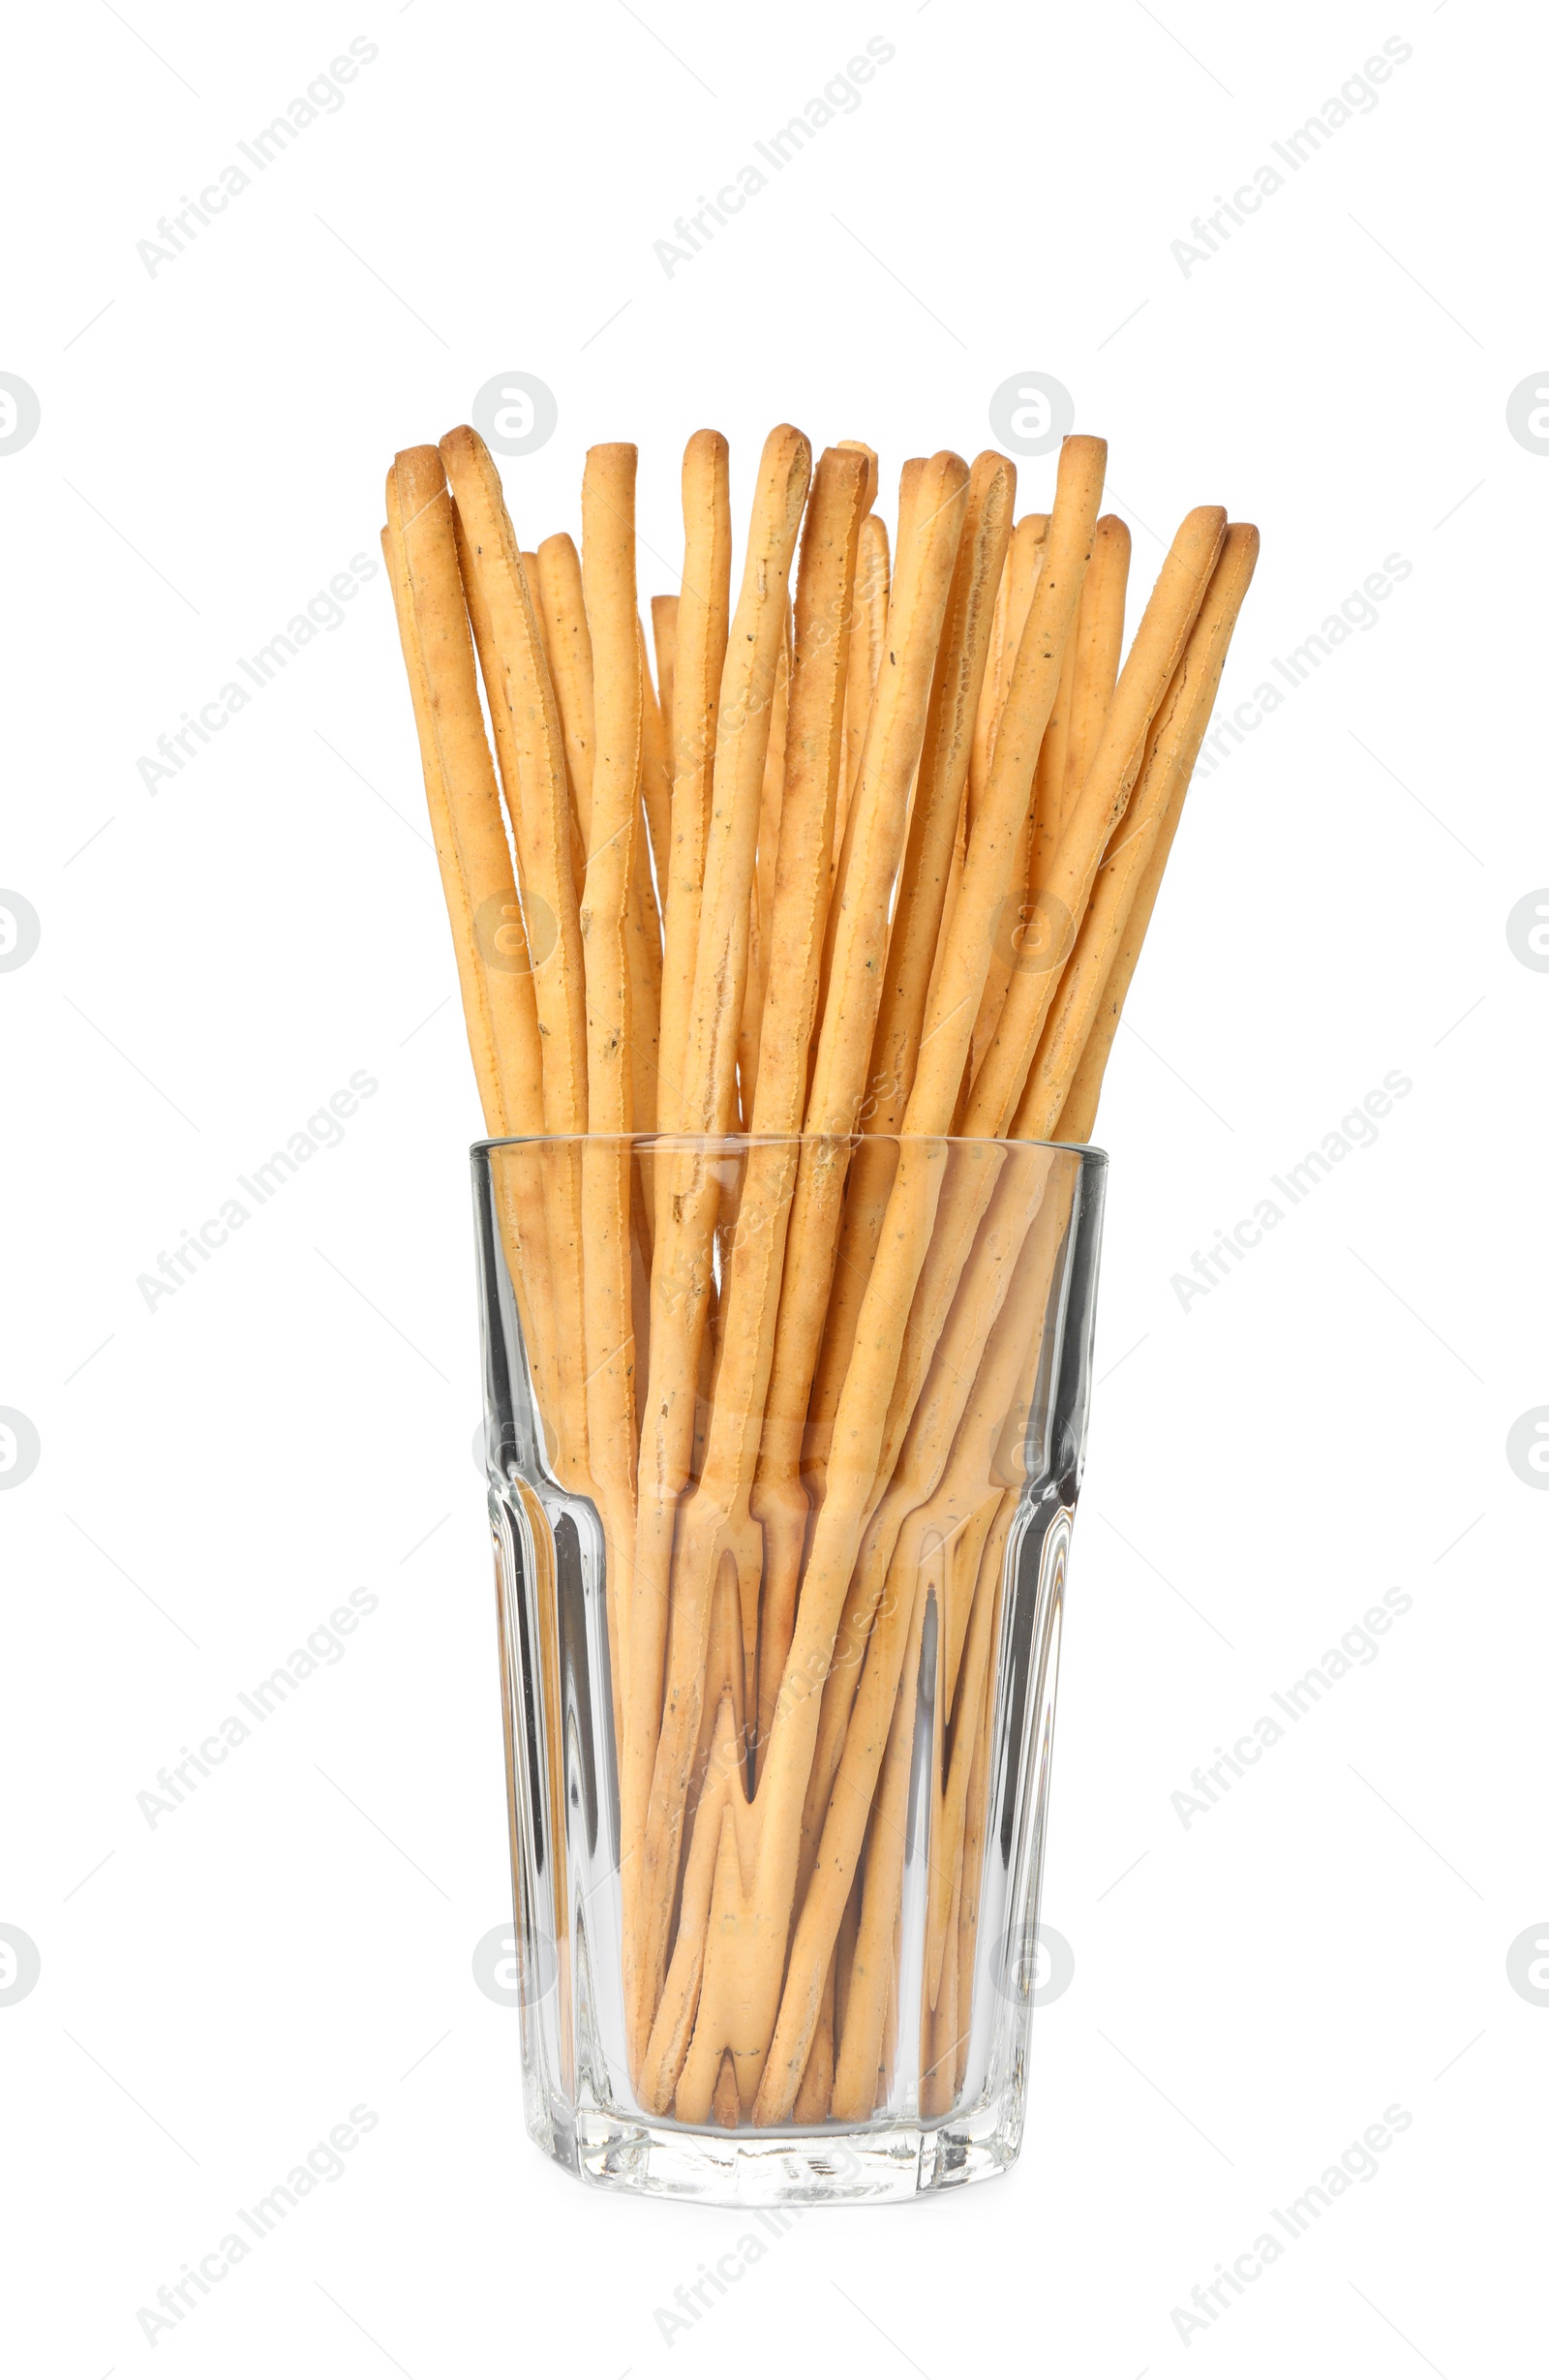 Photo of Delicious grissini sticks in glass on white background